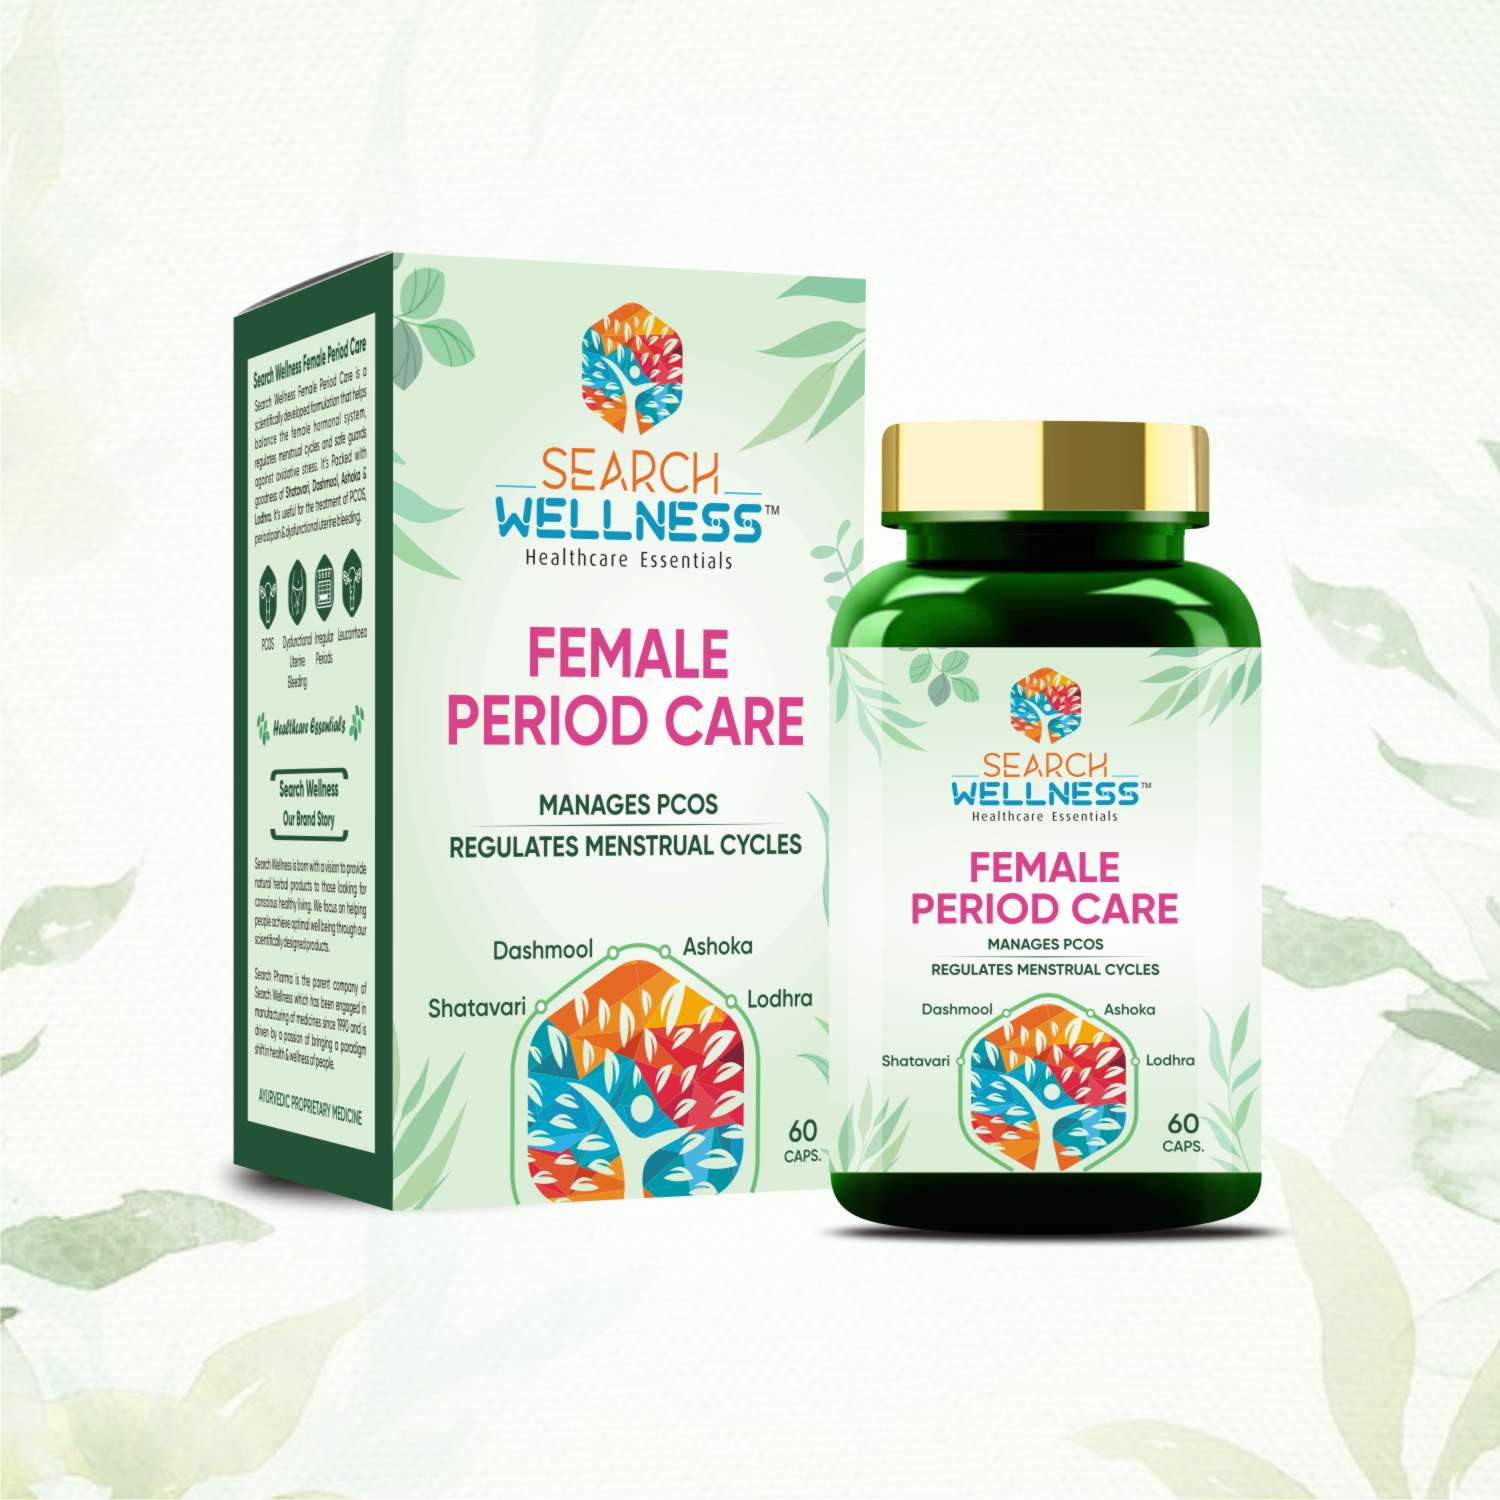 Female Period Care: For better hormonal balance & regularizing periods